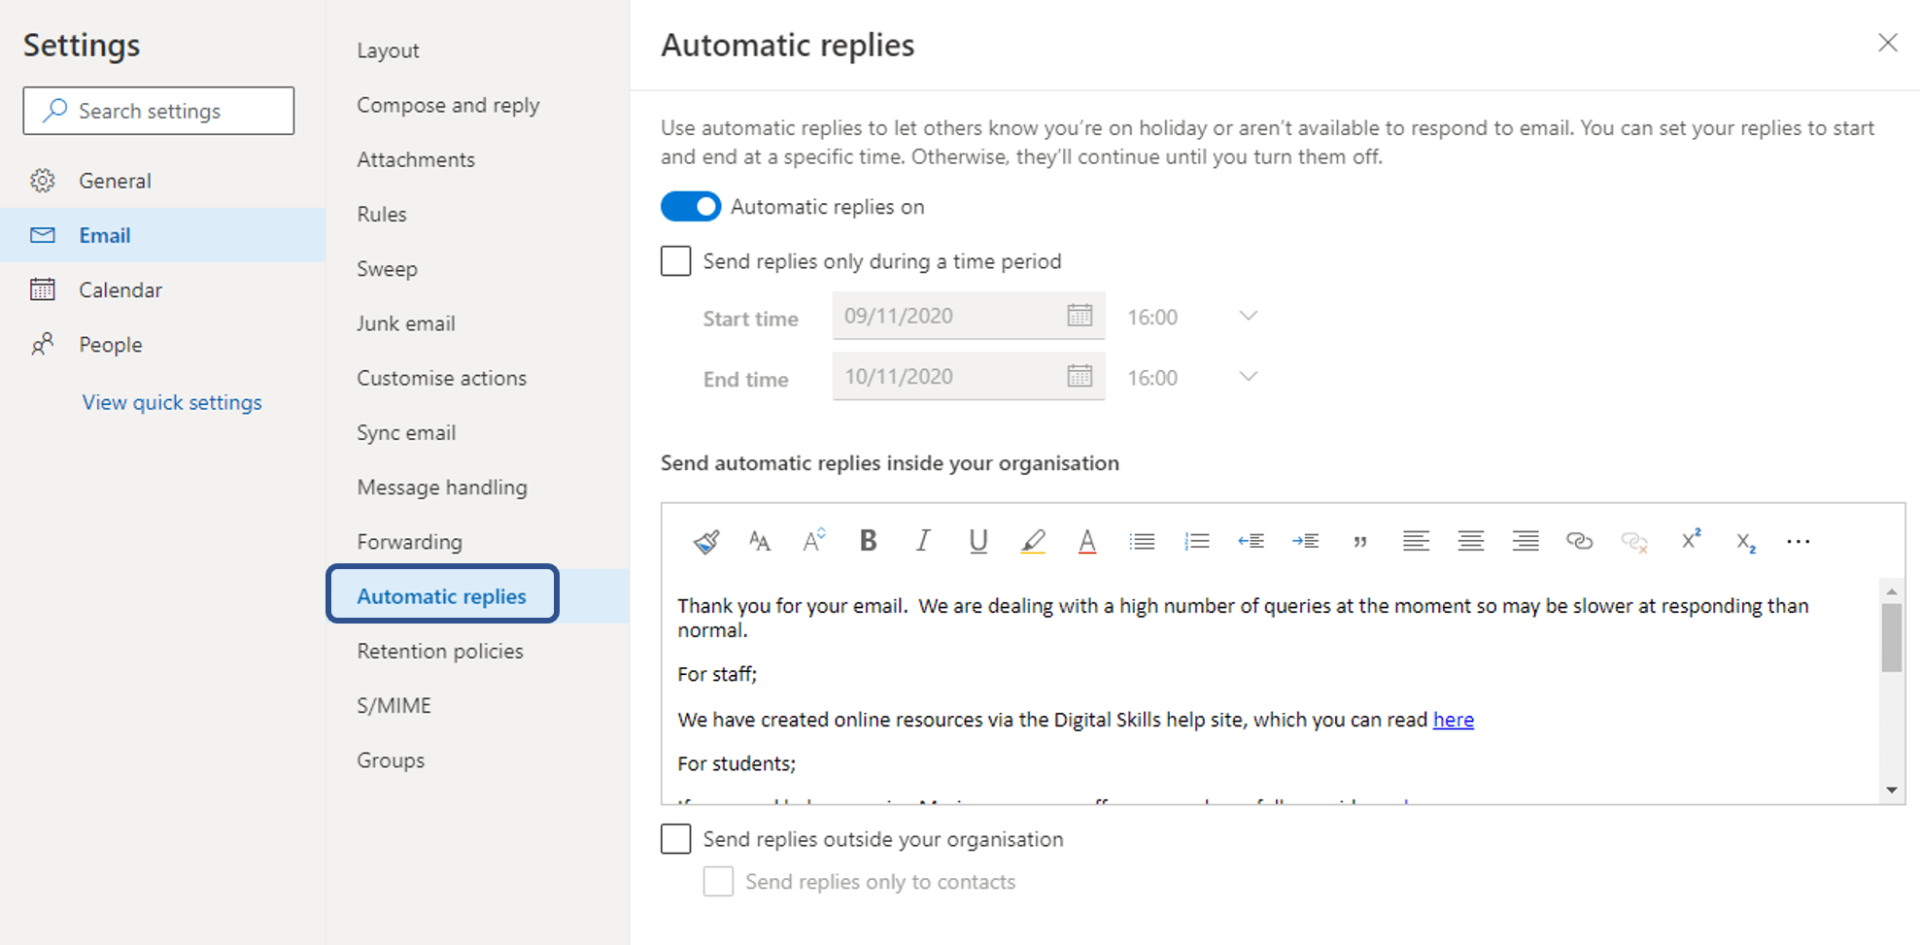 How to Set Automatic Replies in Outlook 365 Web Version - Digital Skills Help